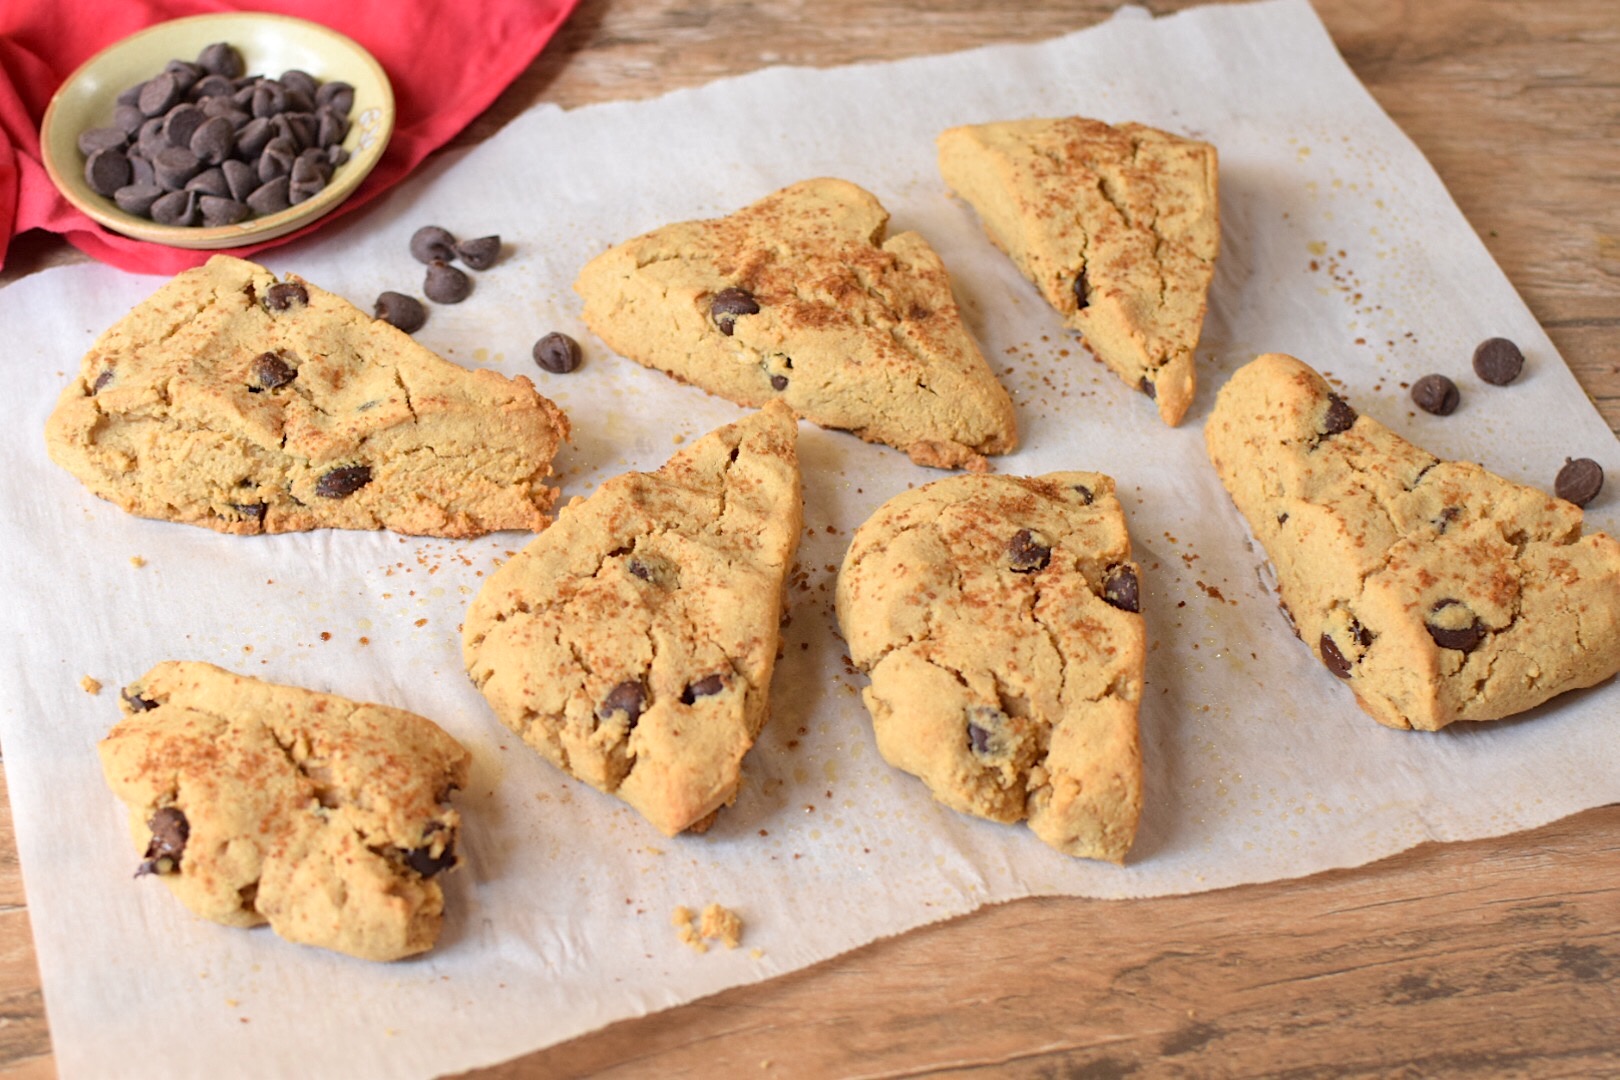 Chocolate Chip Scones for a Candida Diet